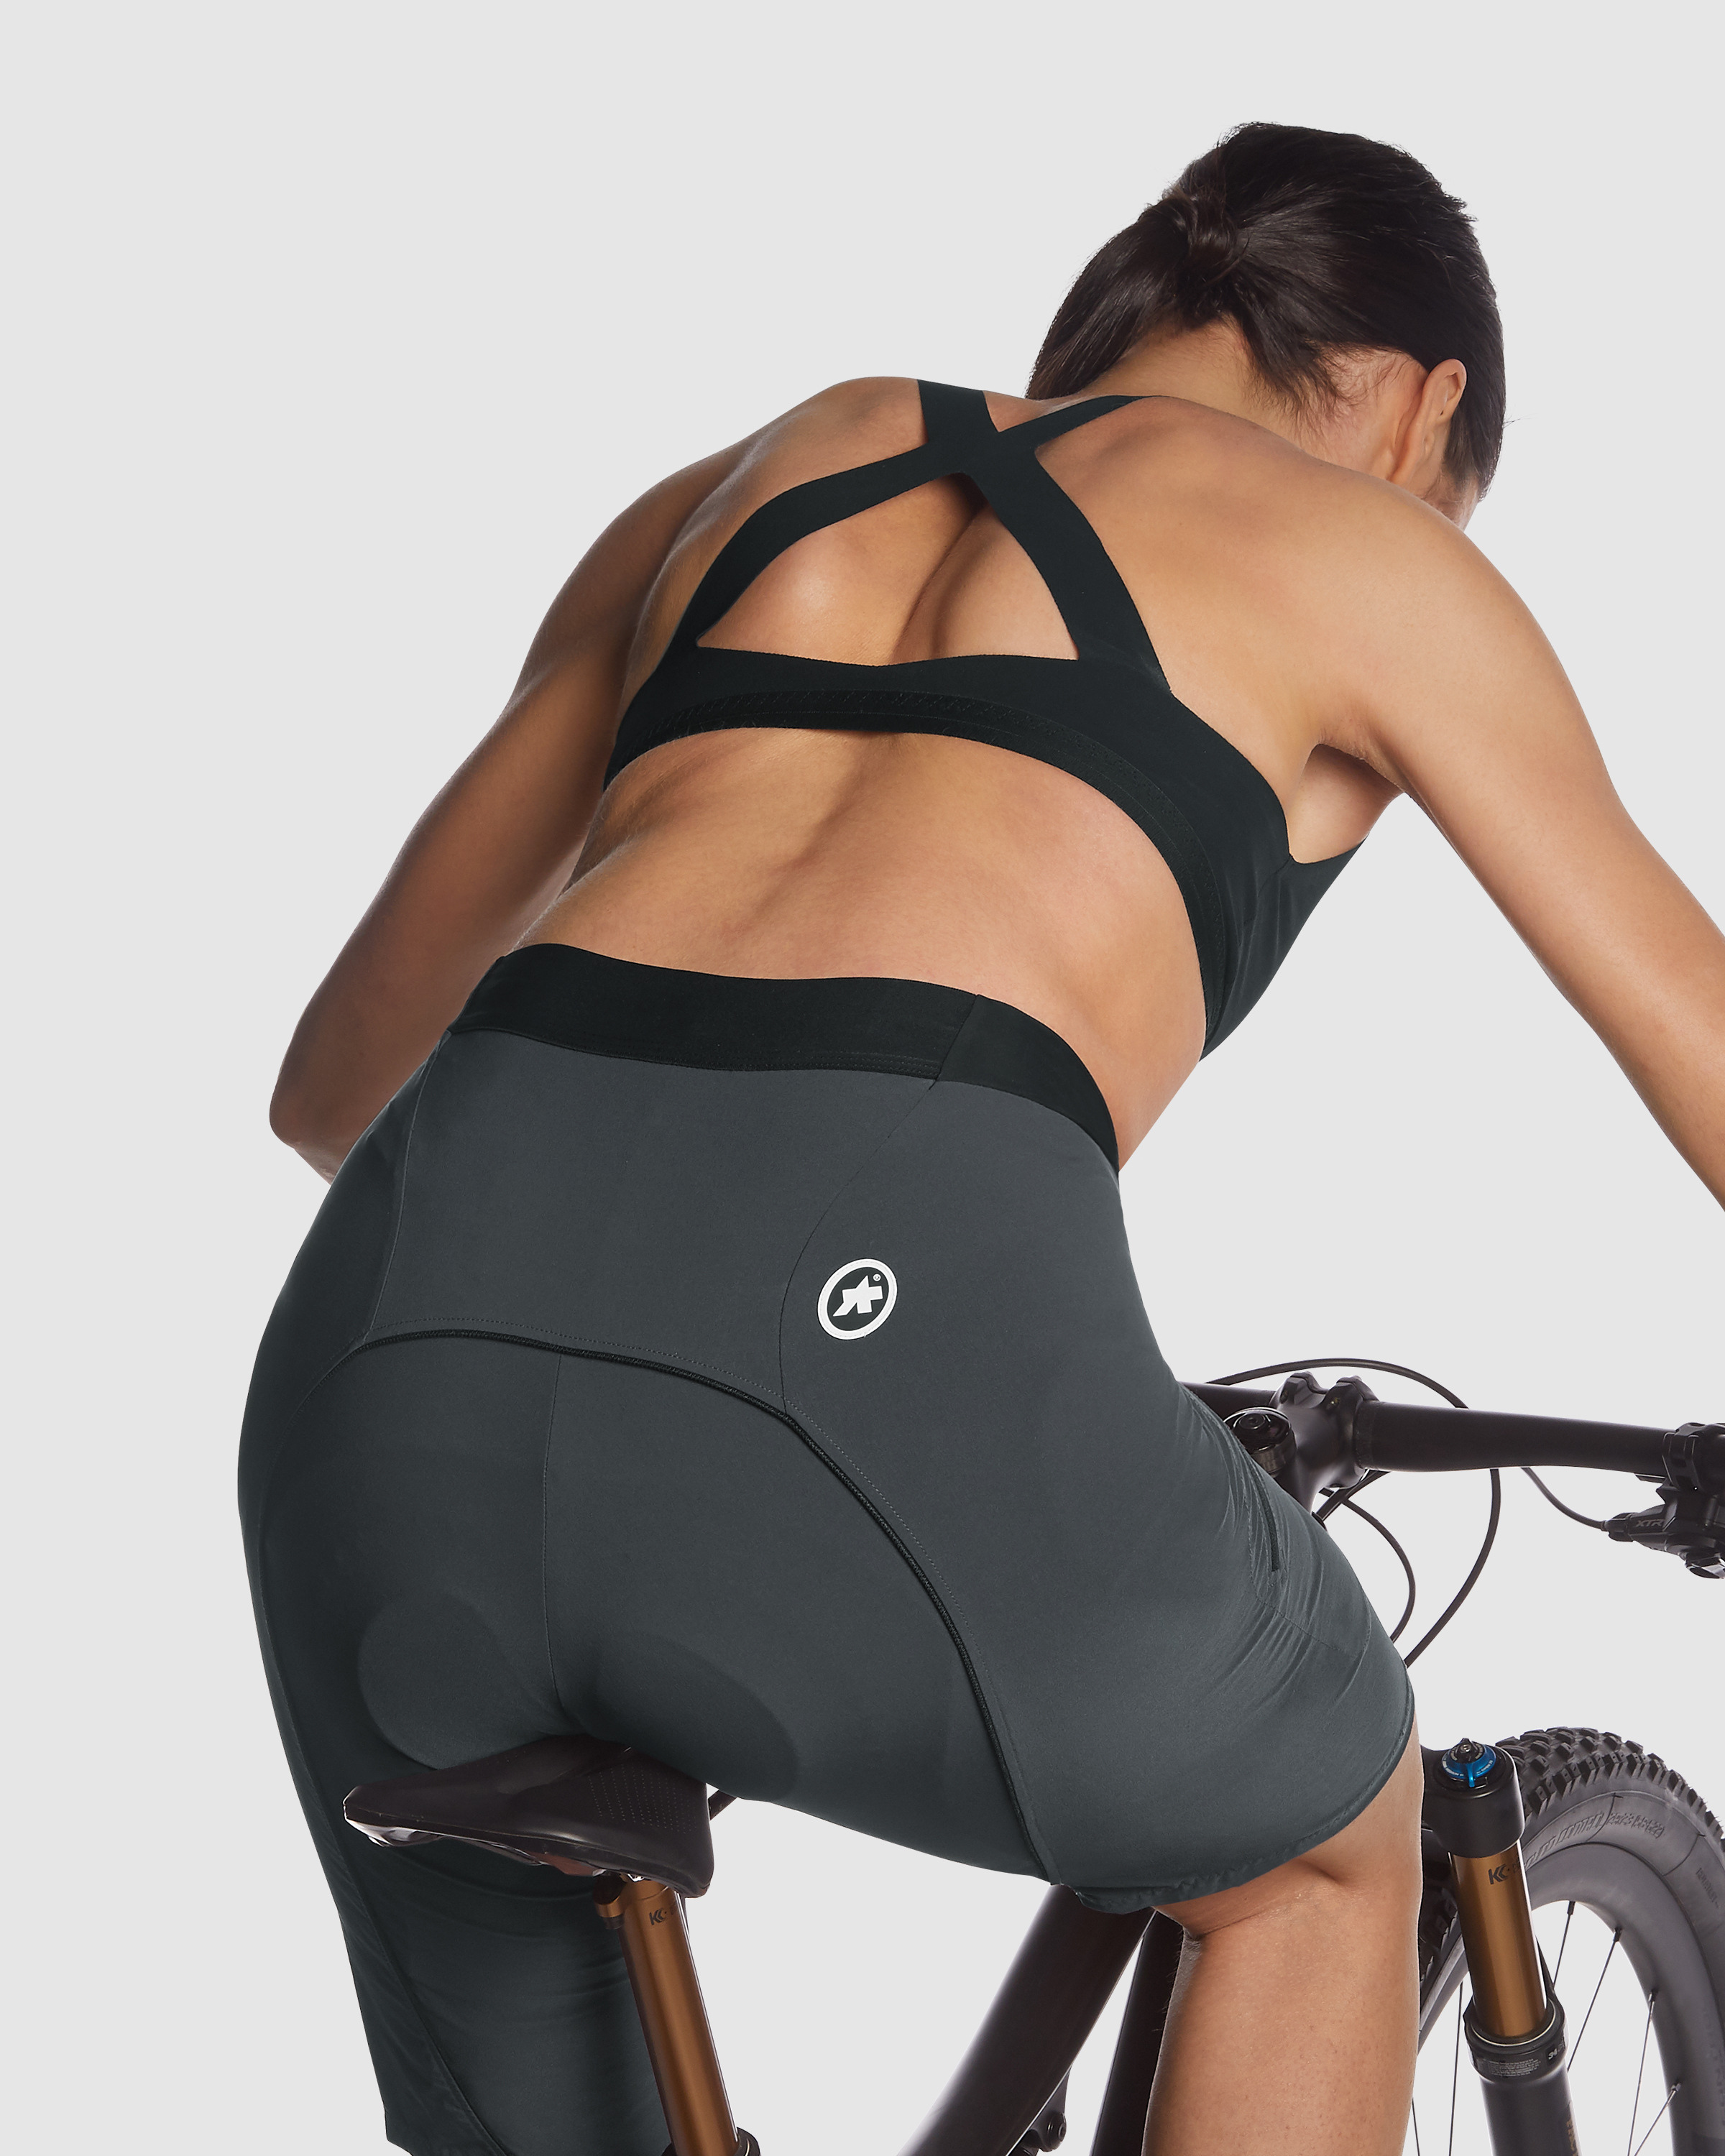 TRAIL Women's Cargo Shorts - ASSOS Of Switzerland - Official Outlet